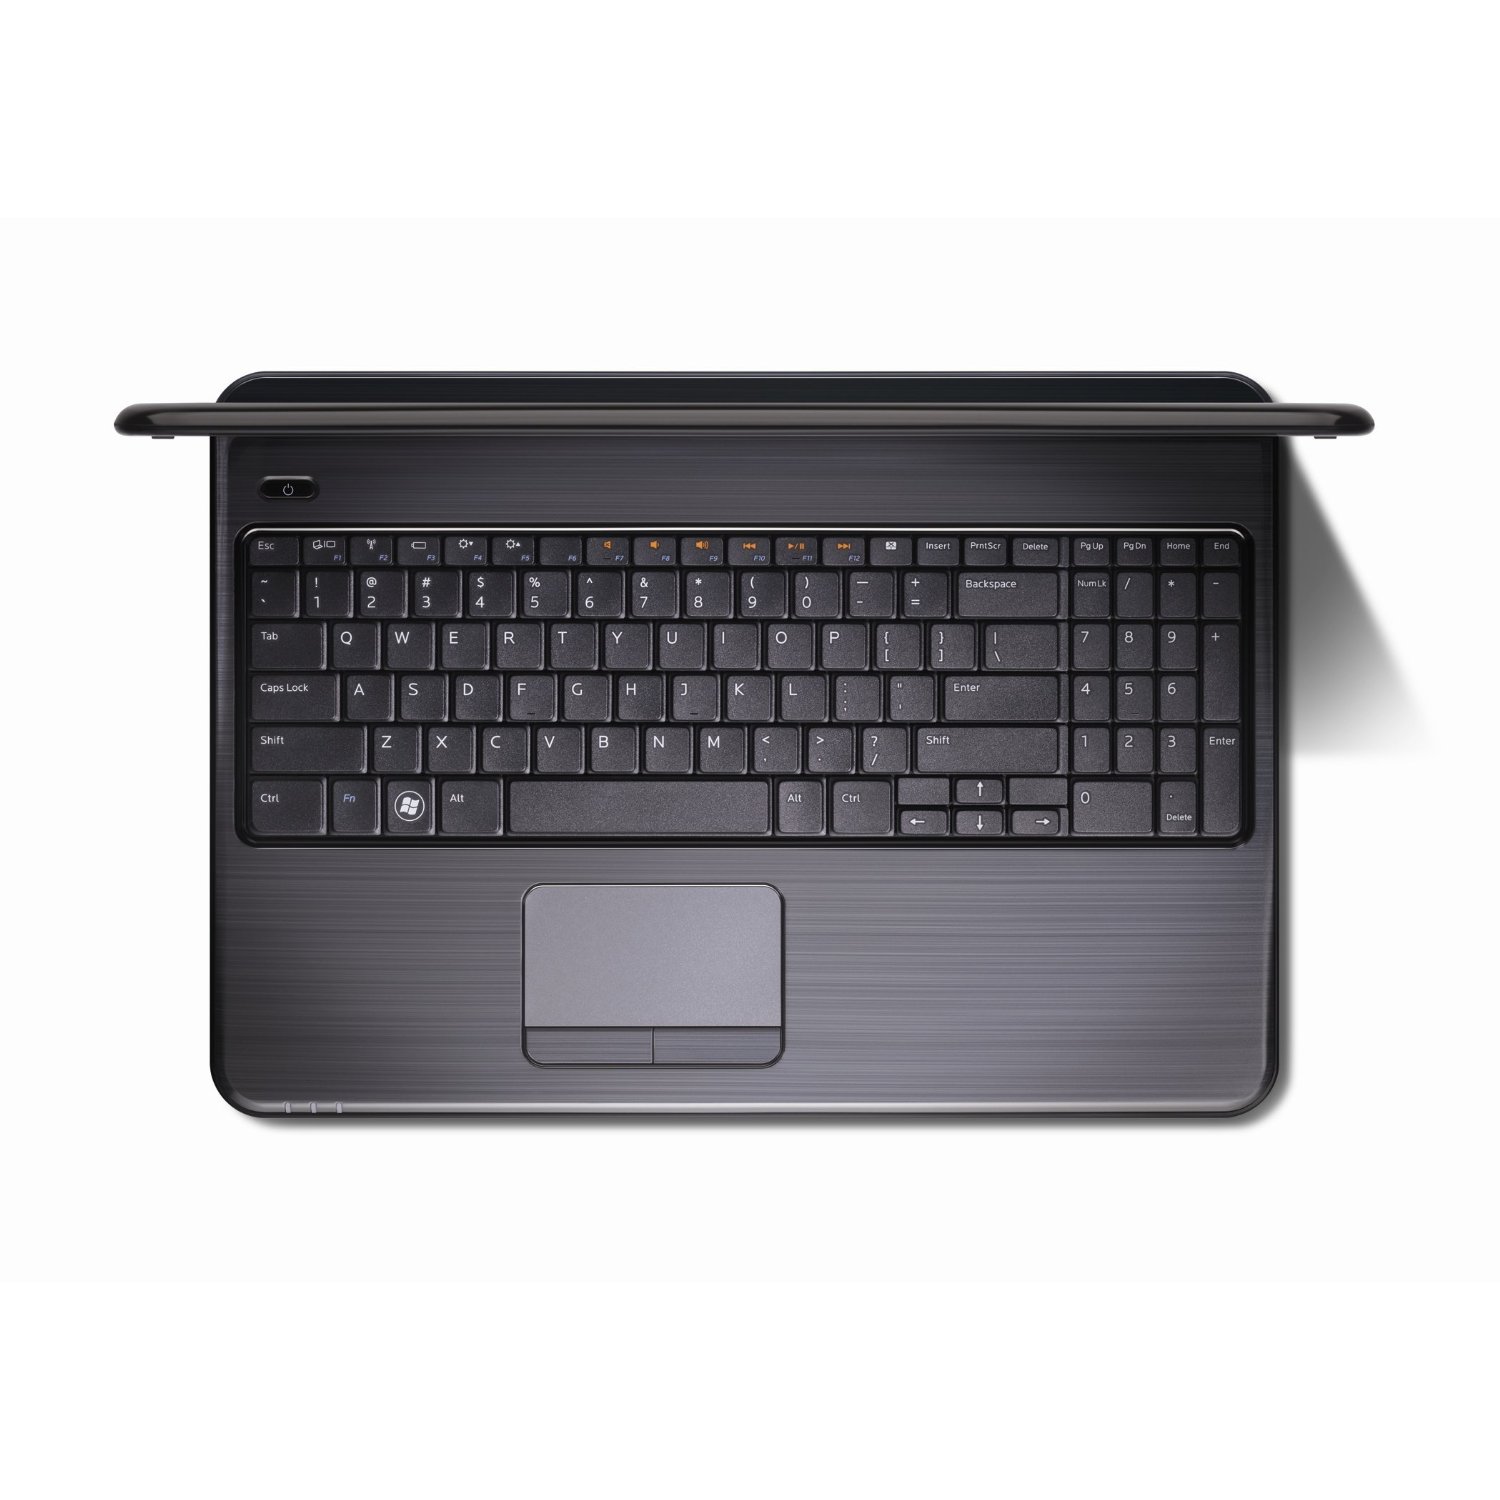 http://thetechjournal.com/wp-content/uploads/images/1110/1318421913-dell-inspiron-15r-i15rn51107223dbk-156inch-laptop-10.jpg